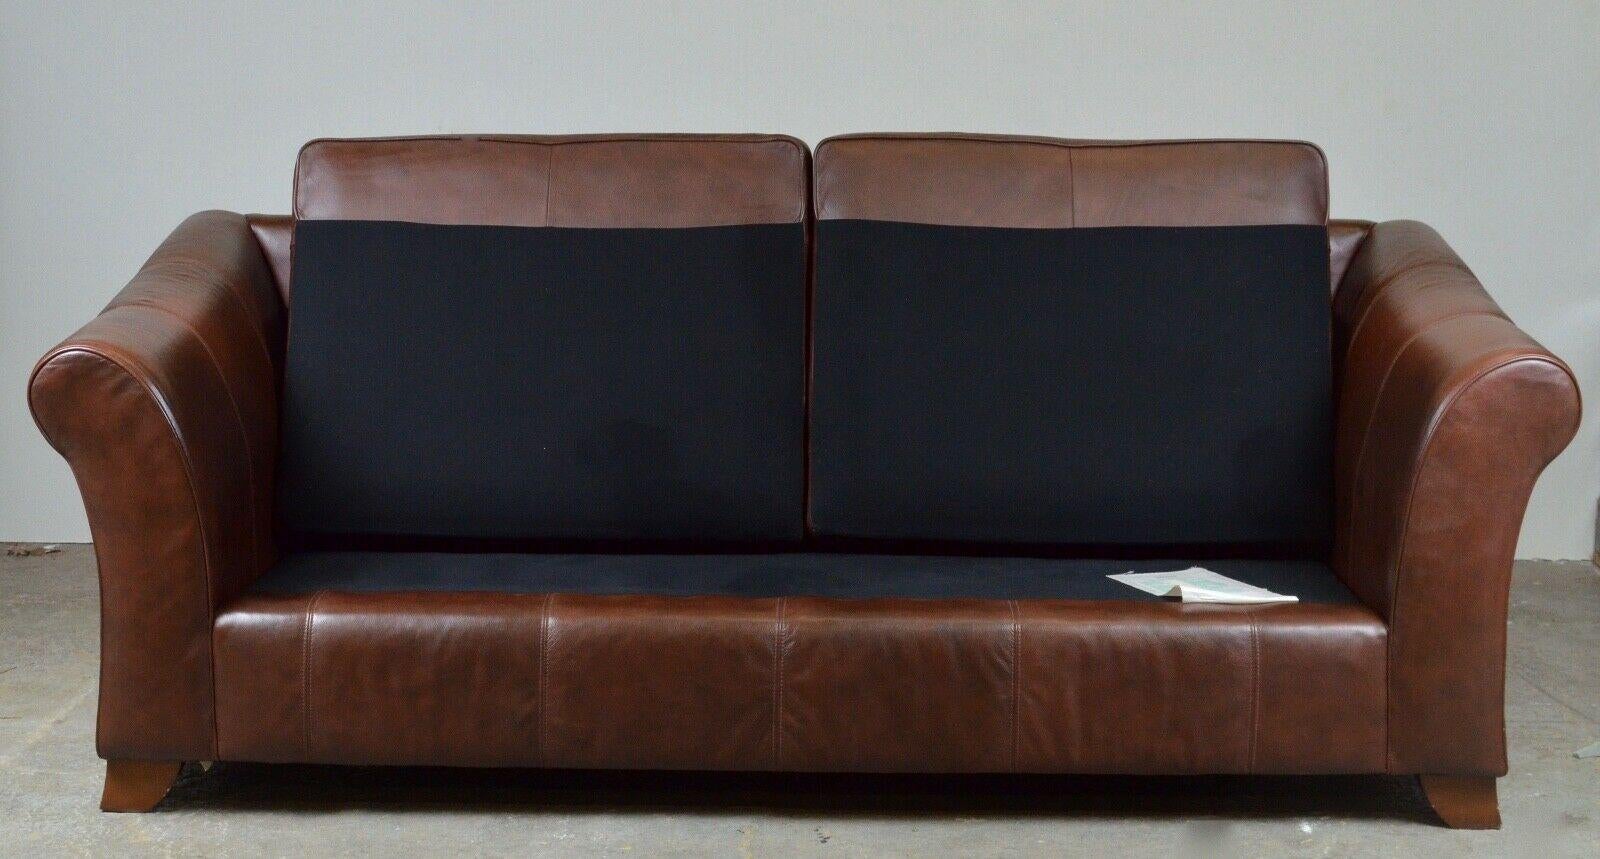 20th Century British Marks & Spencer Abbey 3 Seater Brown Leather Sofa / Armchair Available